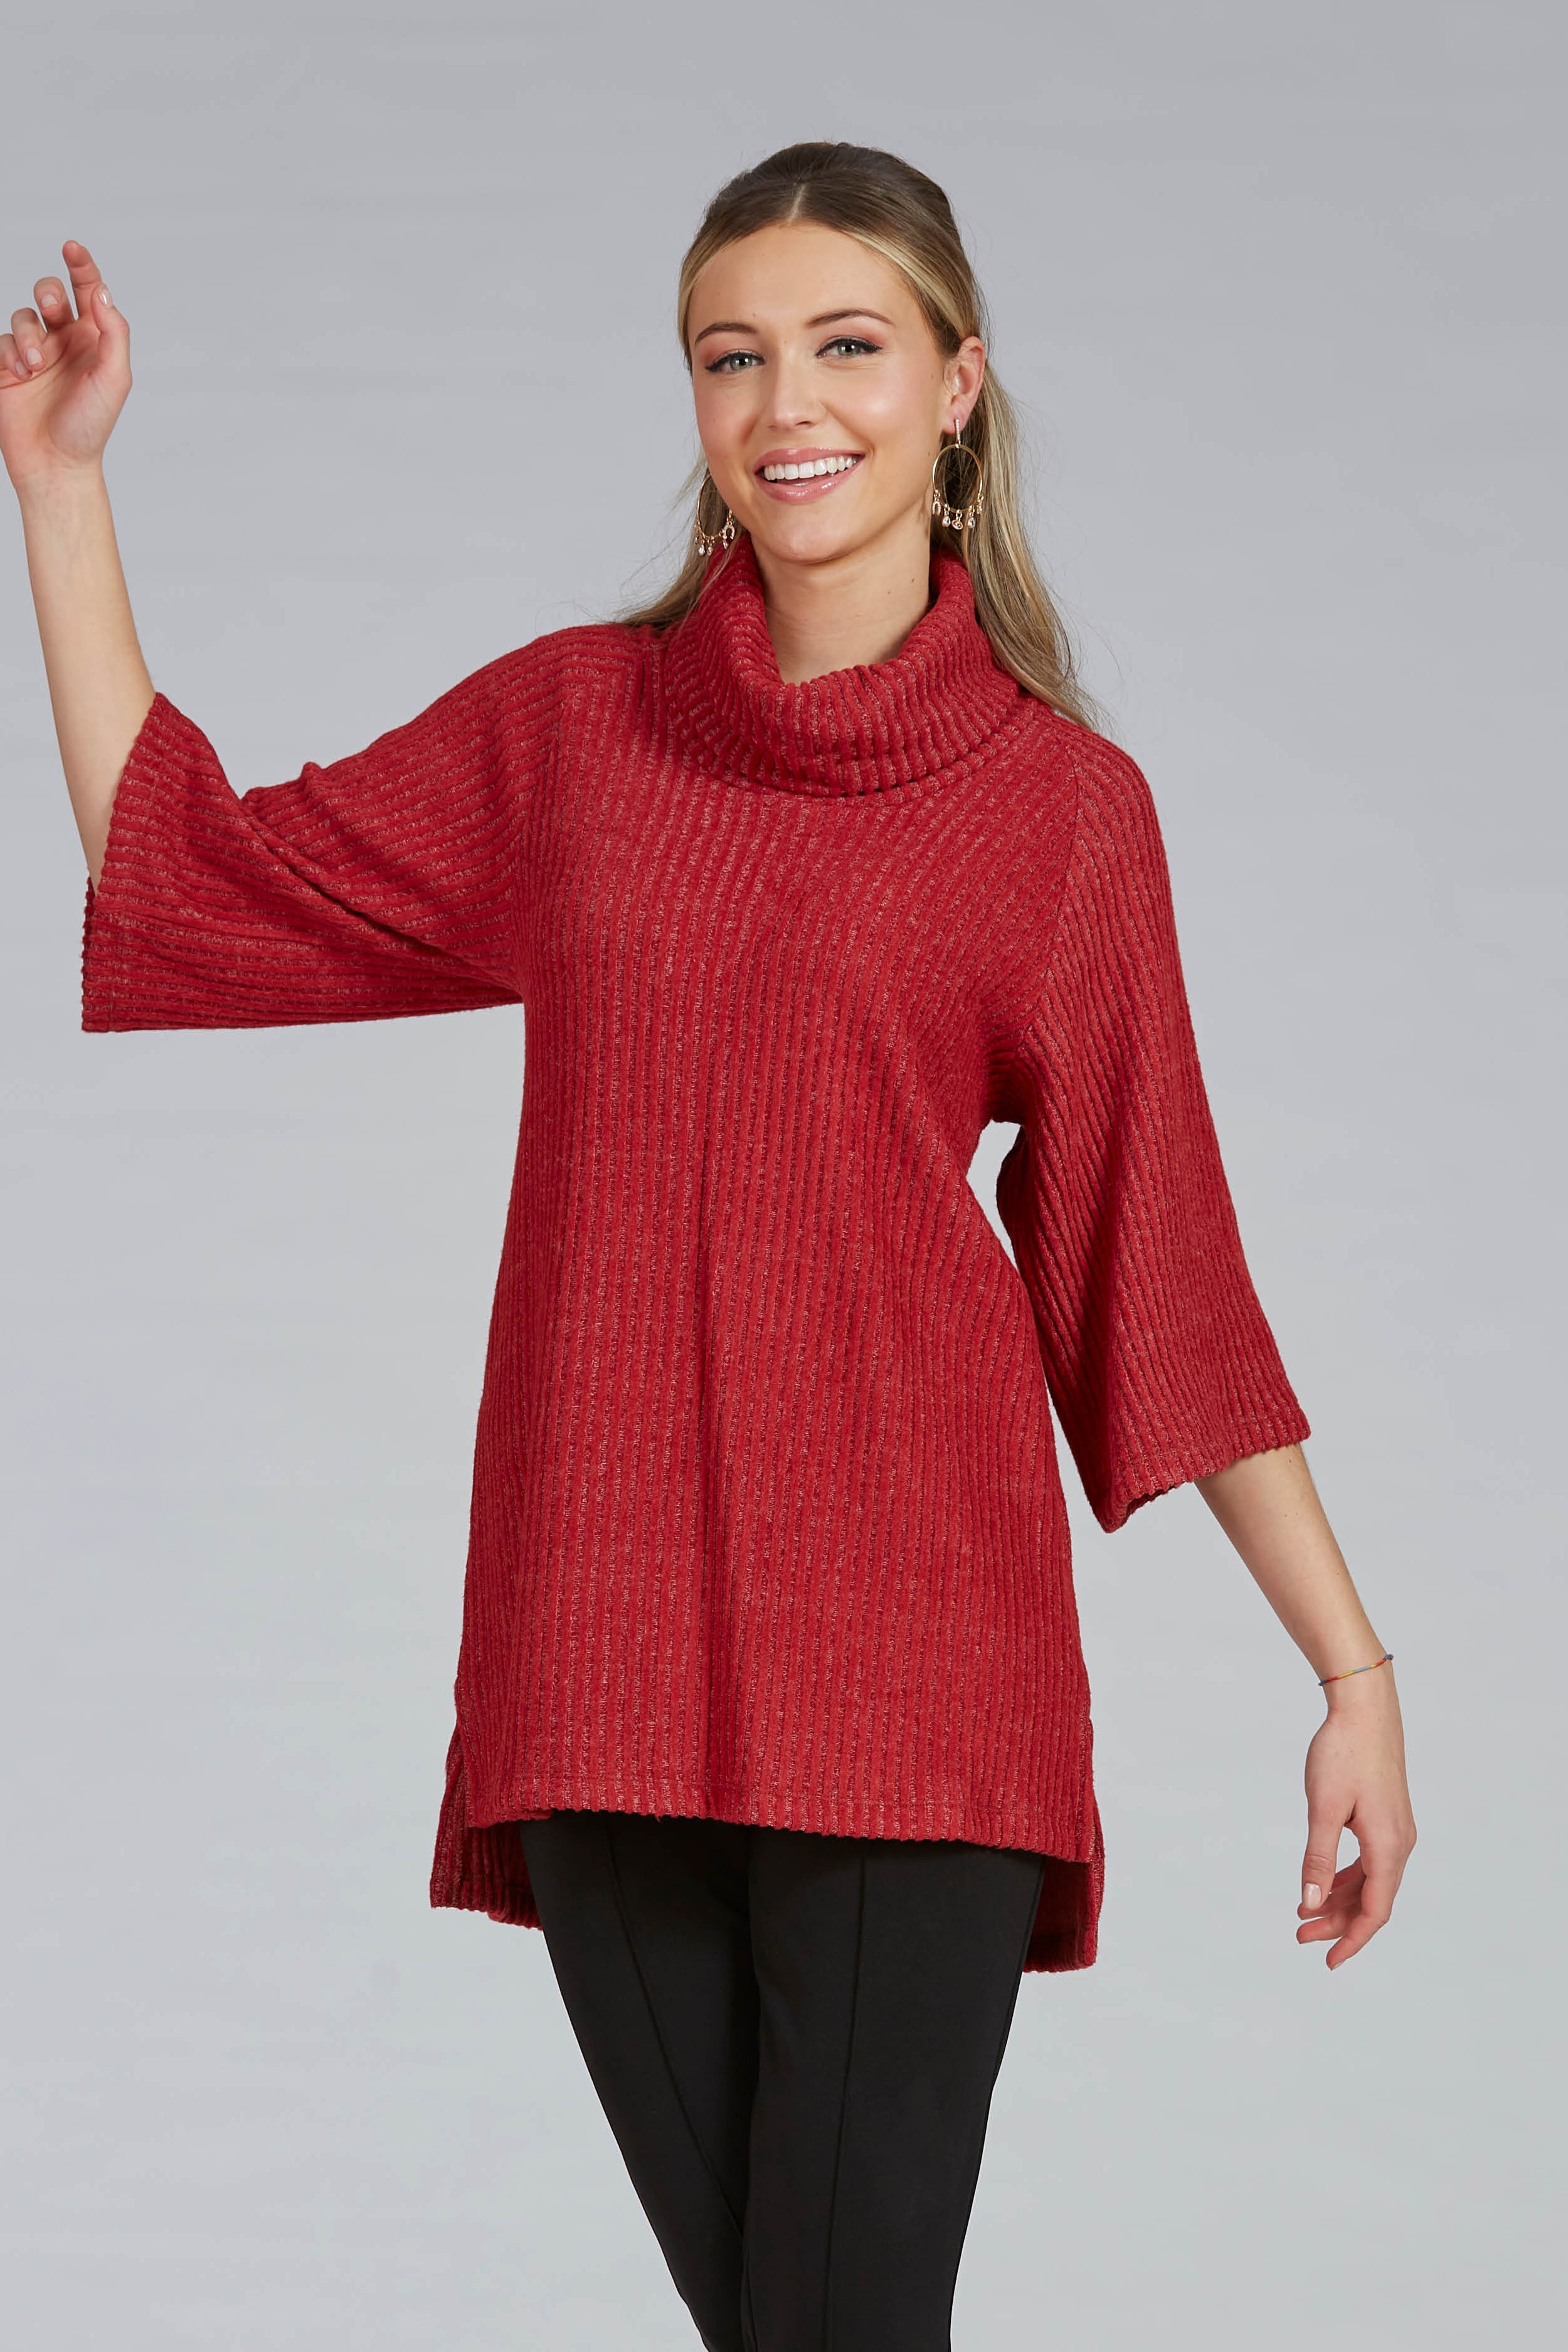 Rib Tunic by Luc Fontaine, Red, cowl neck, wide 3/4 sleeves, hi-low hemline, side slits, sizes 4-16, made in Canada